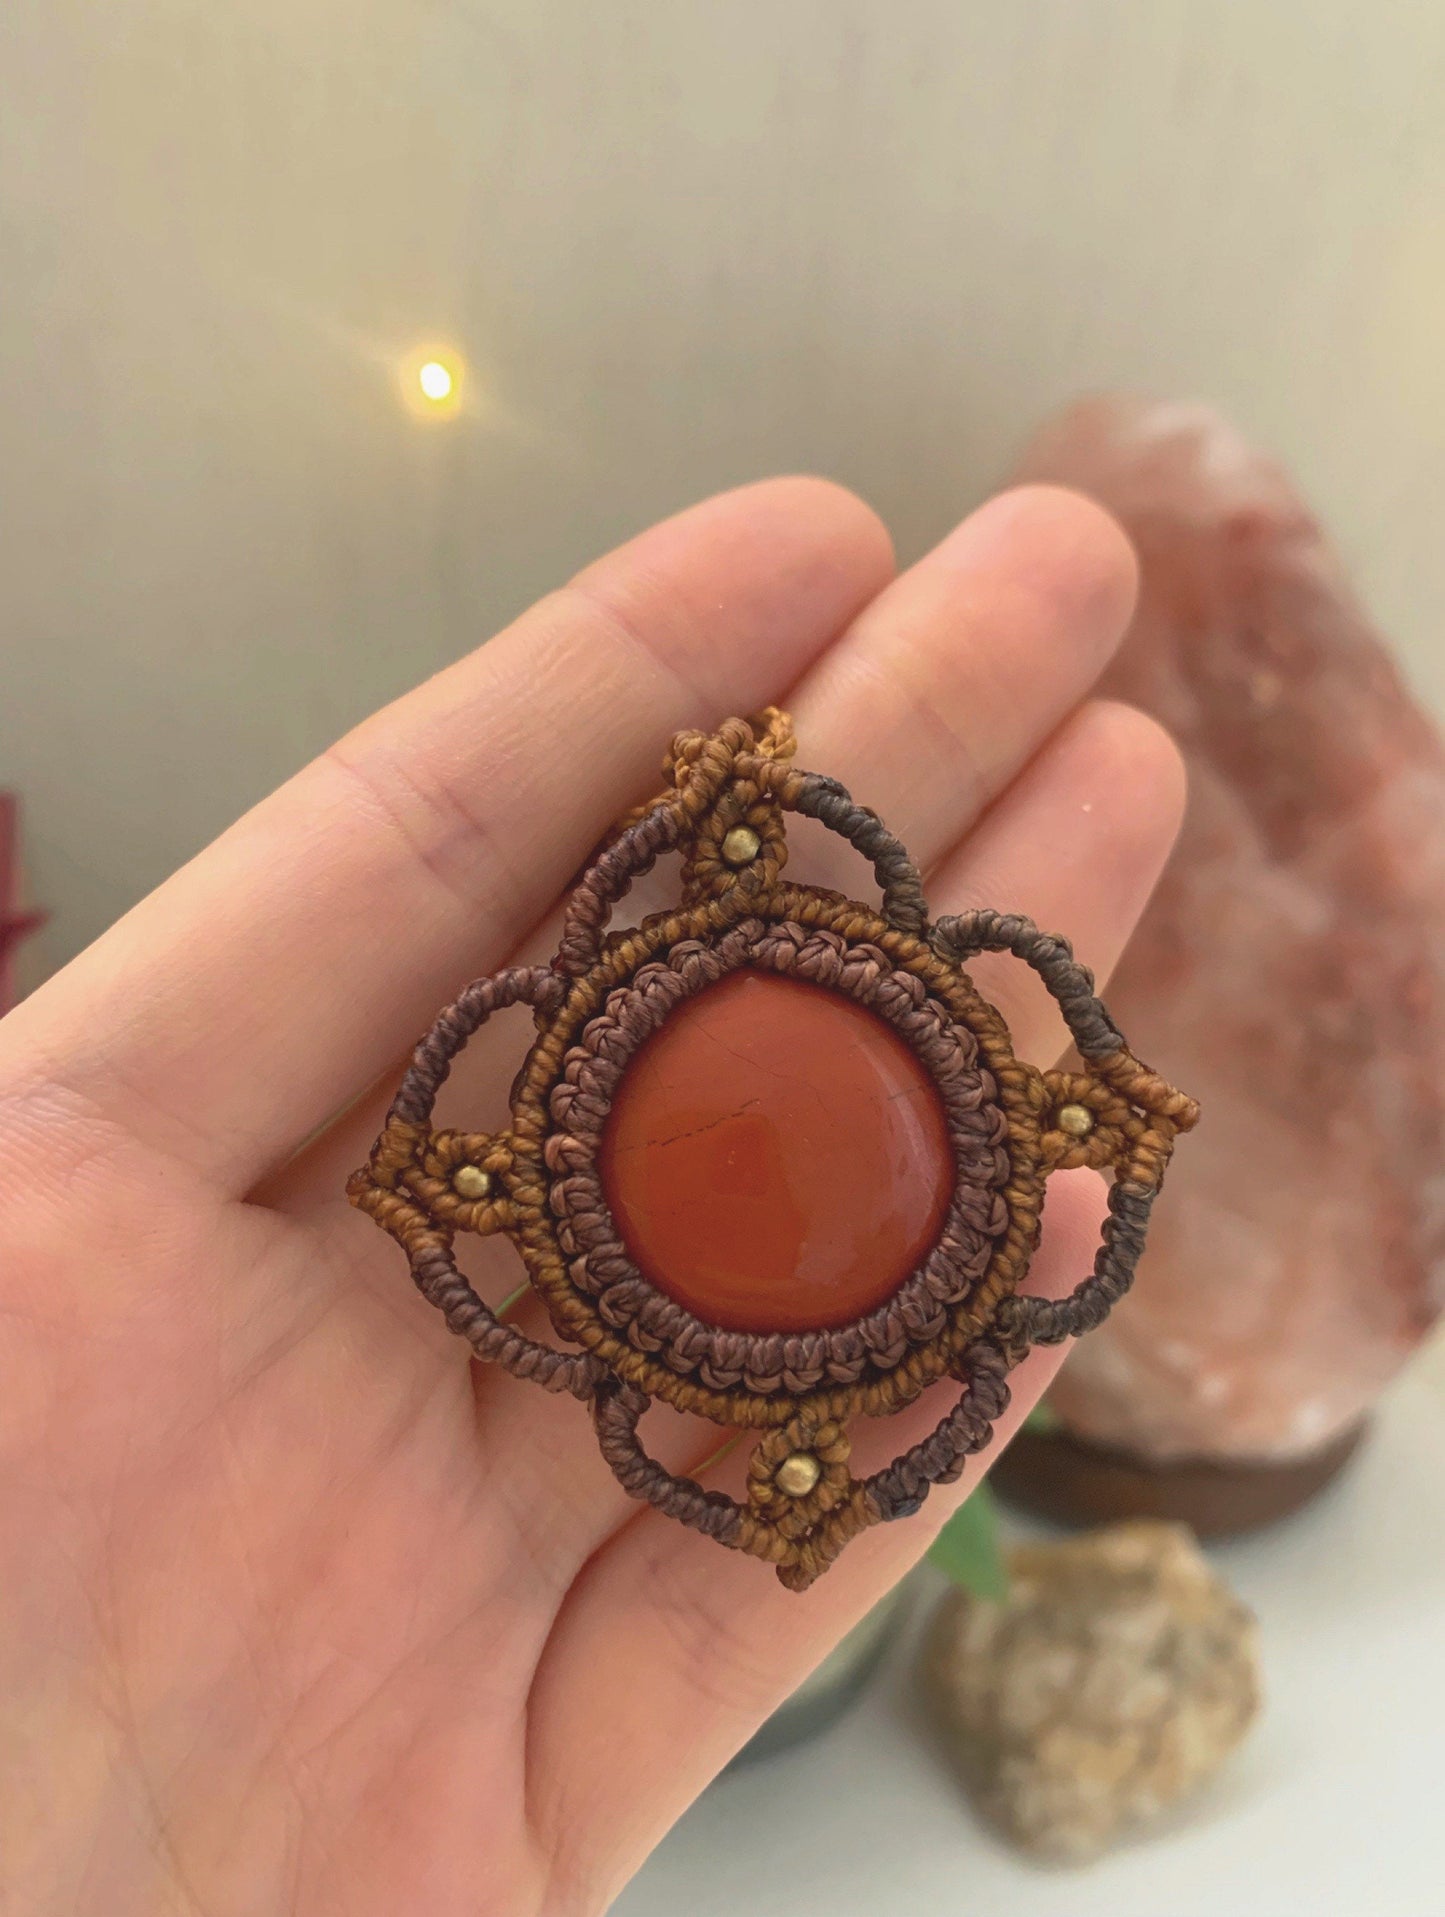 Root Chakra Red Jasper Necklace